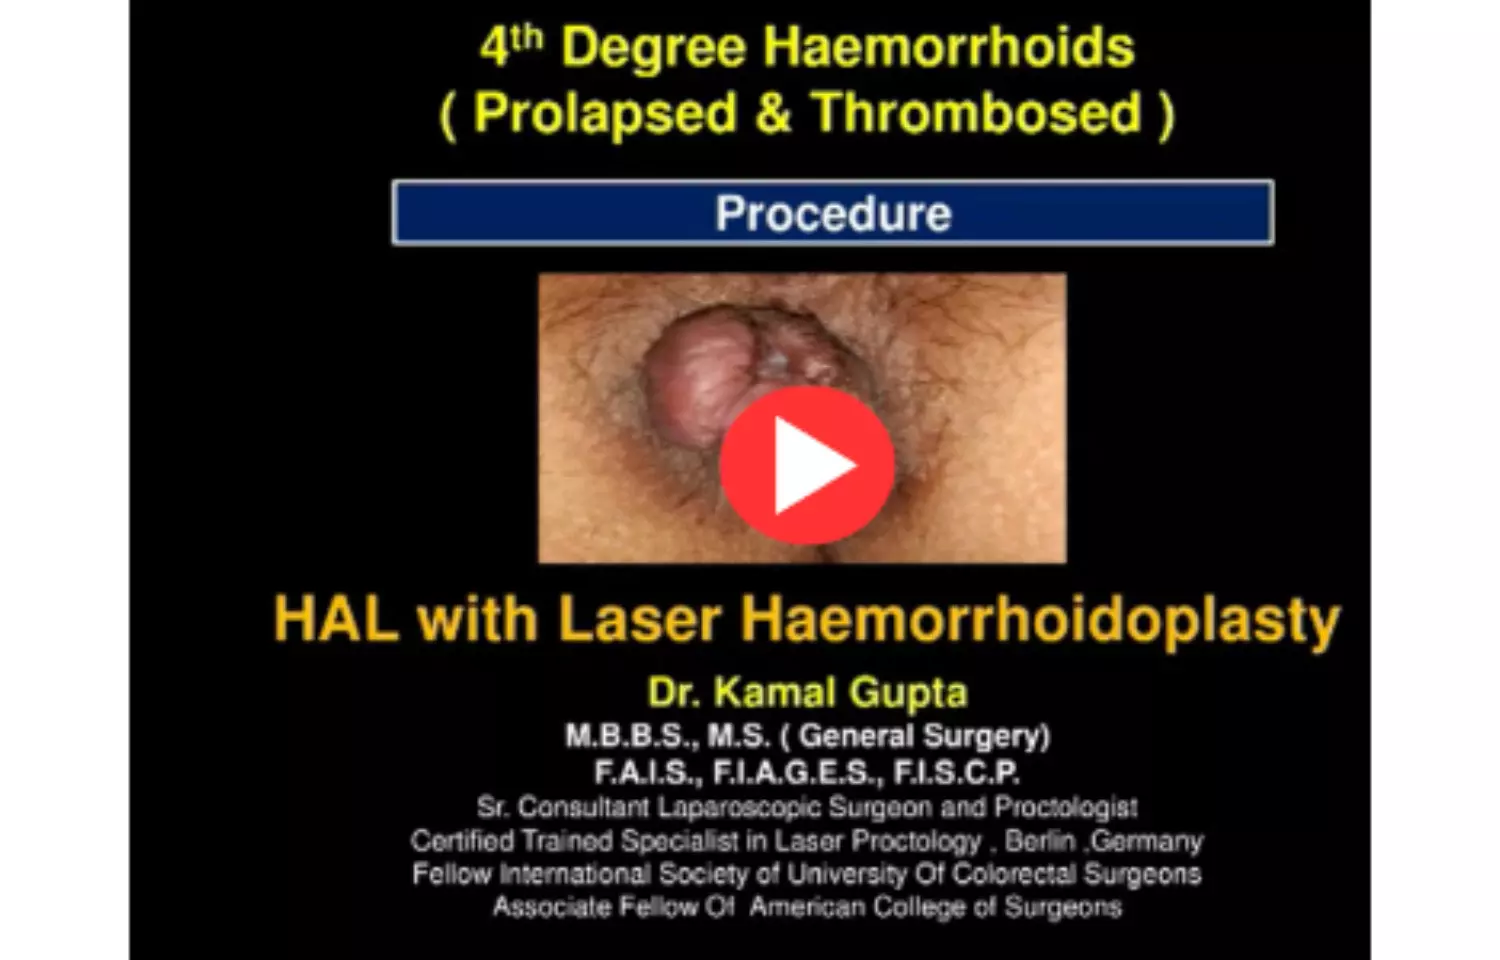 4th Degree Haemorrhoids Prolapsed and Thrombosed Piles